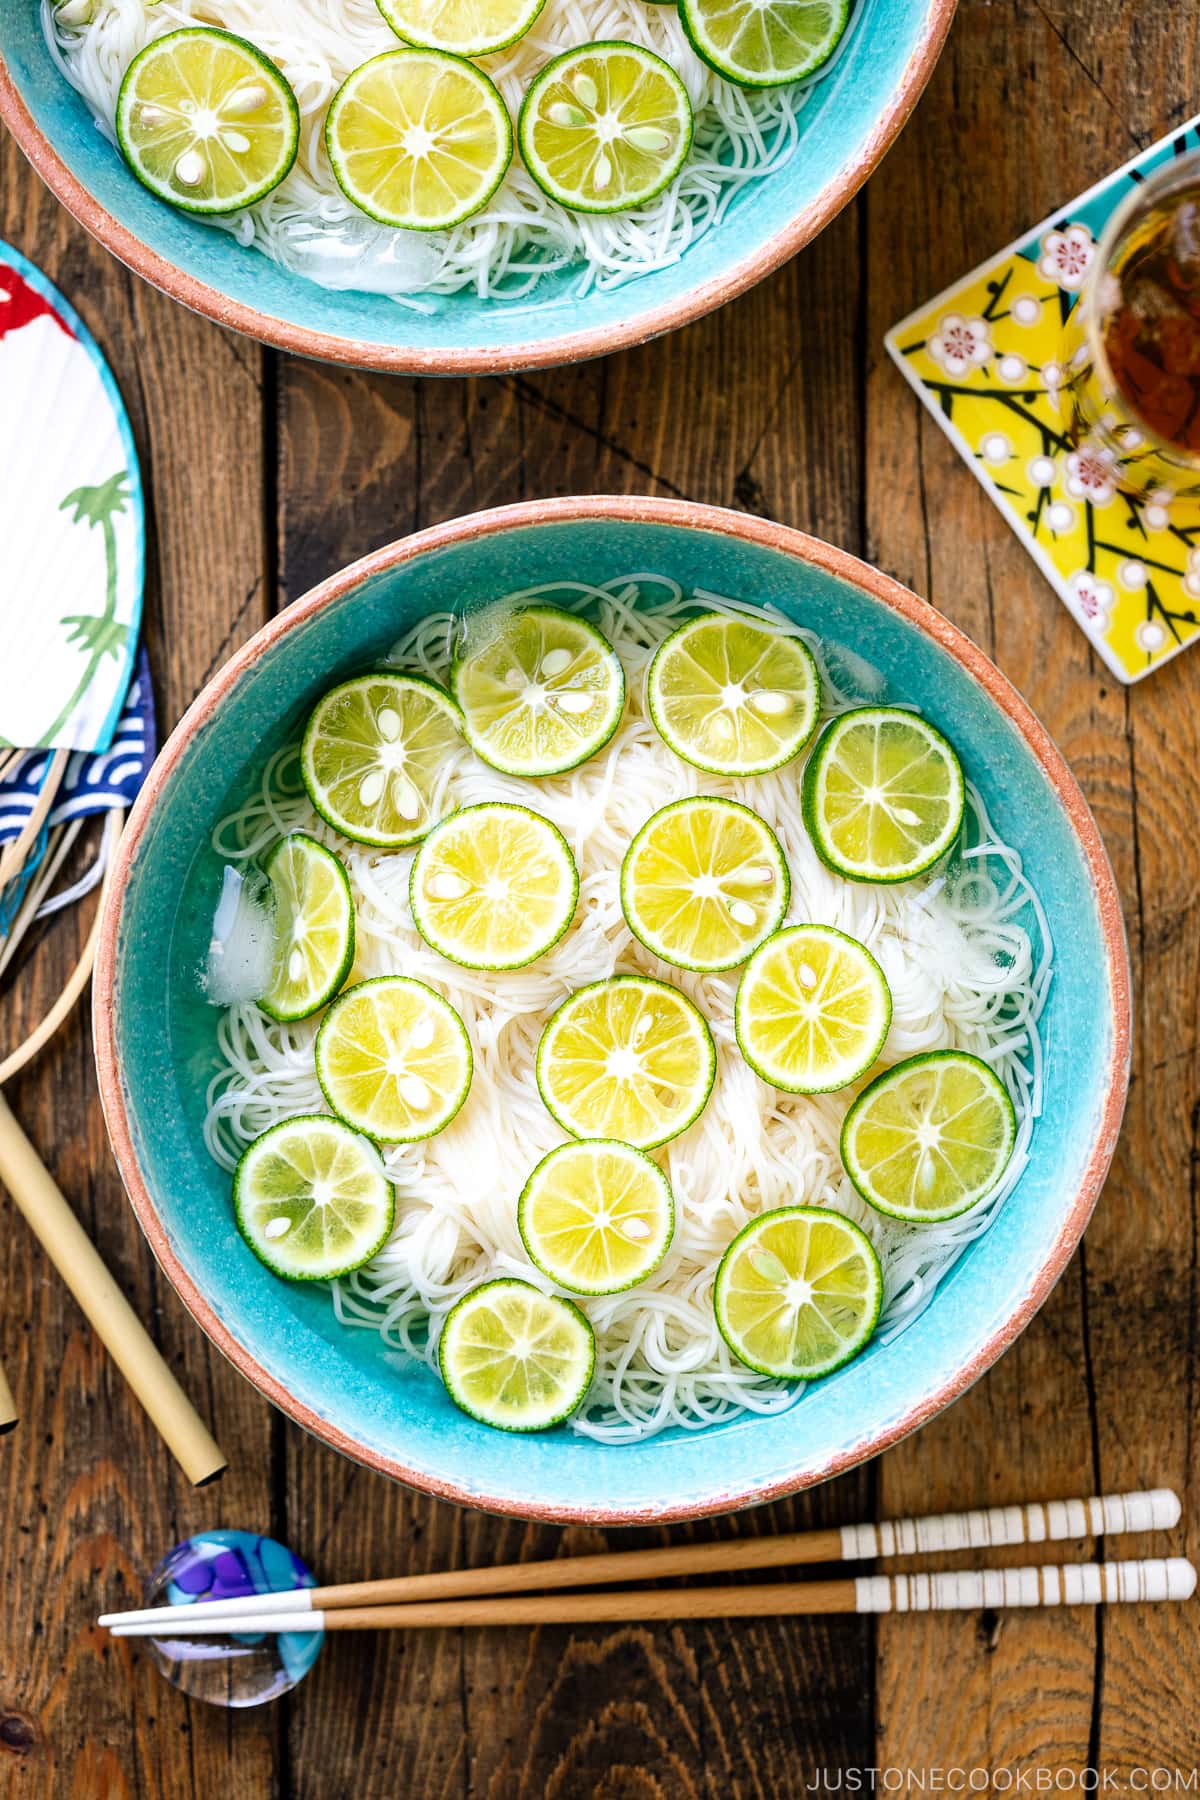 A blue bowl containing cold somen noodles topped with thinly sliced sudachi citrus.